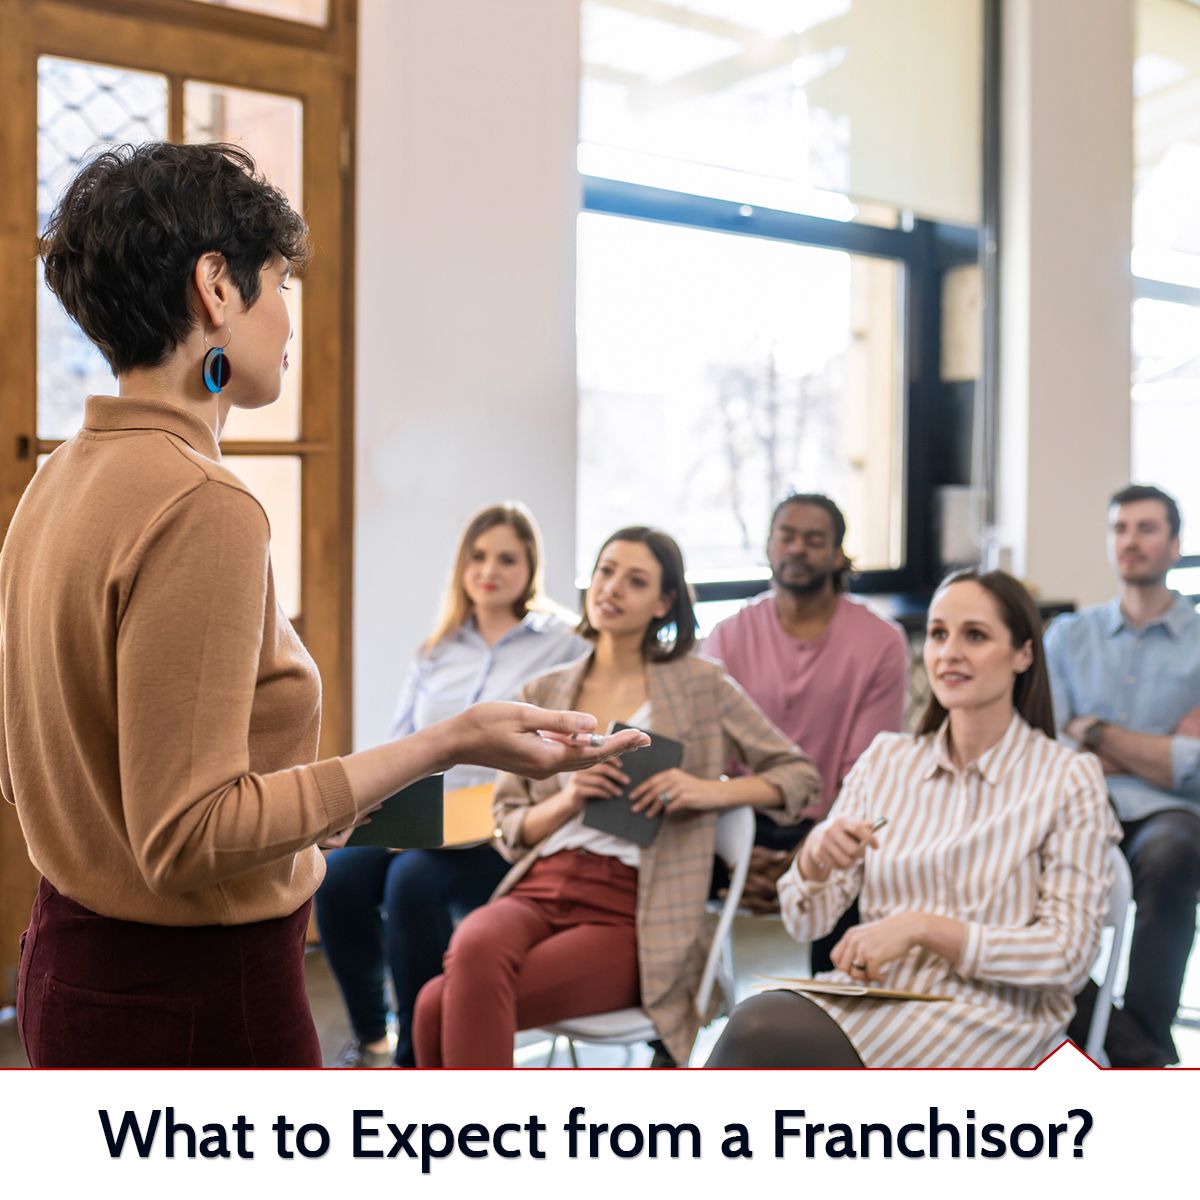 What to Expect from a Franchisor